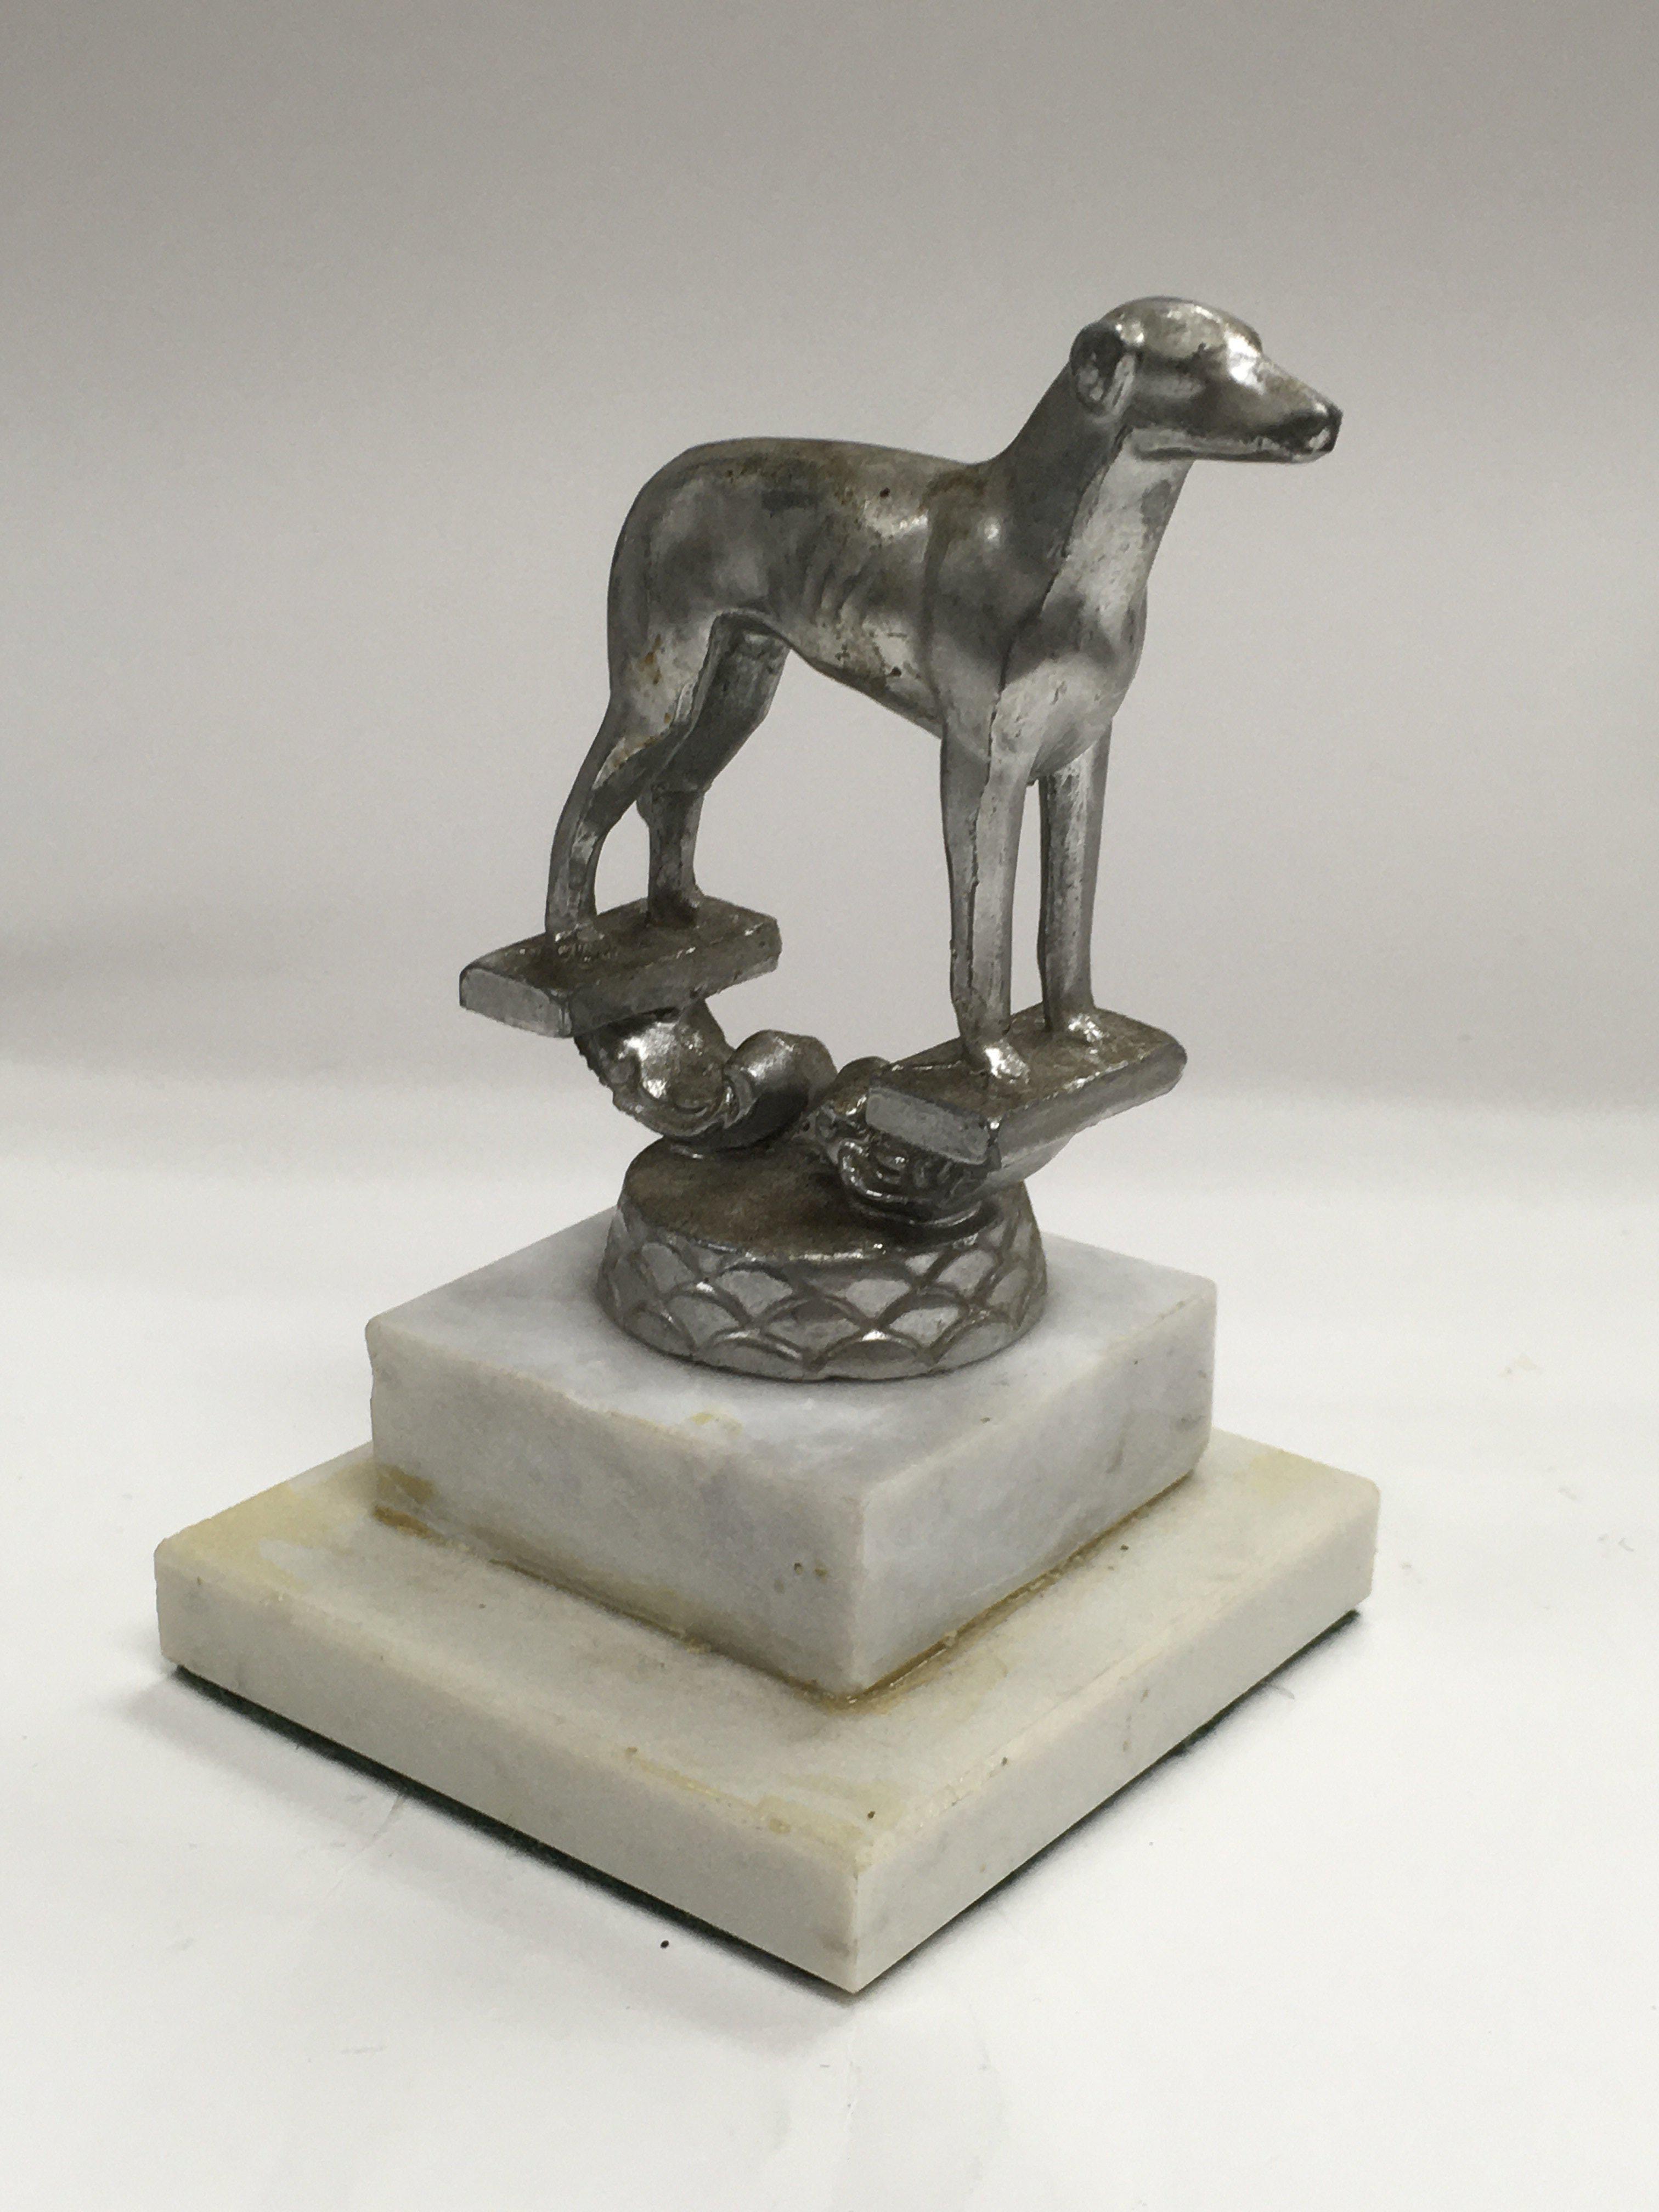 A small car mascot on the form of a greyhound rais